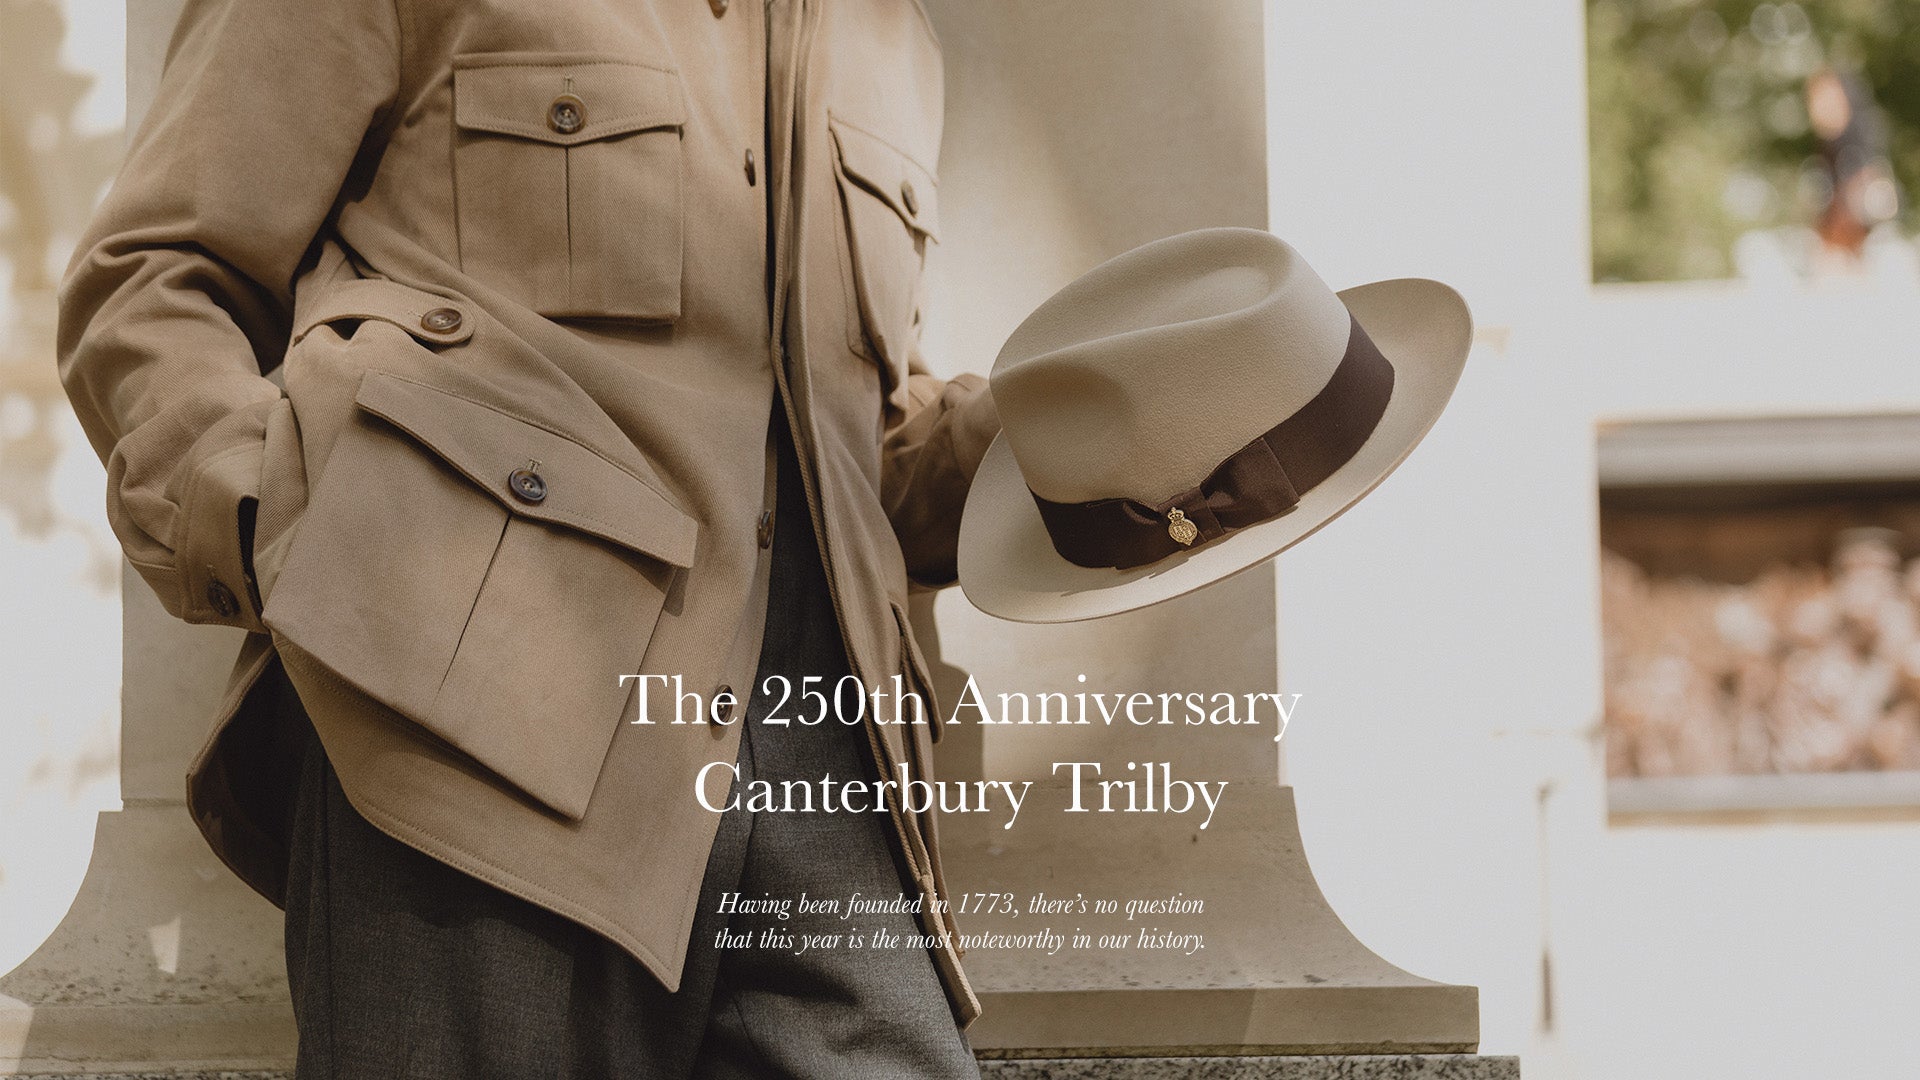 Introducing: The 250th Anniversary Canterbury Trilby